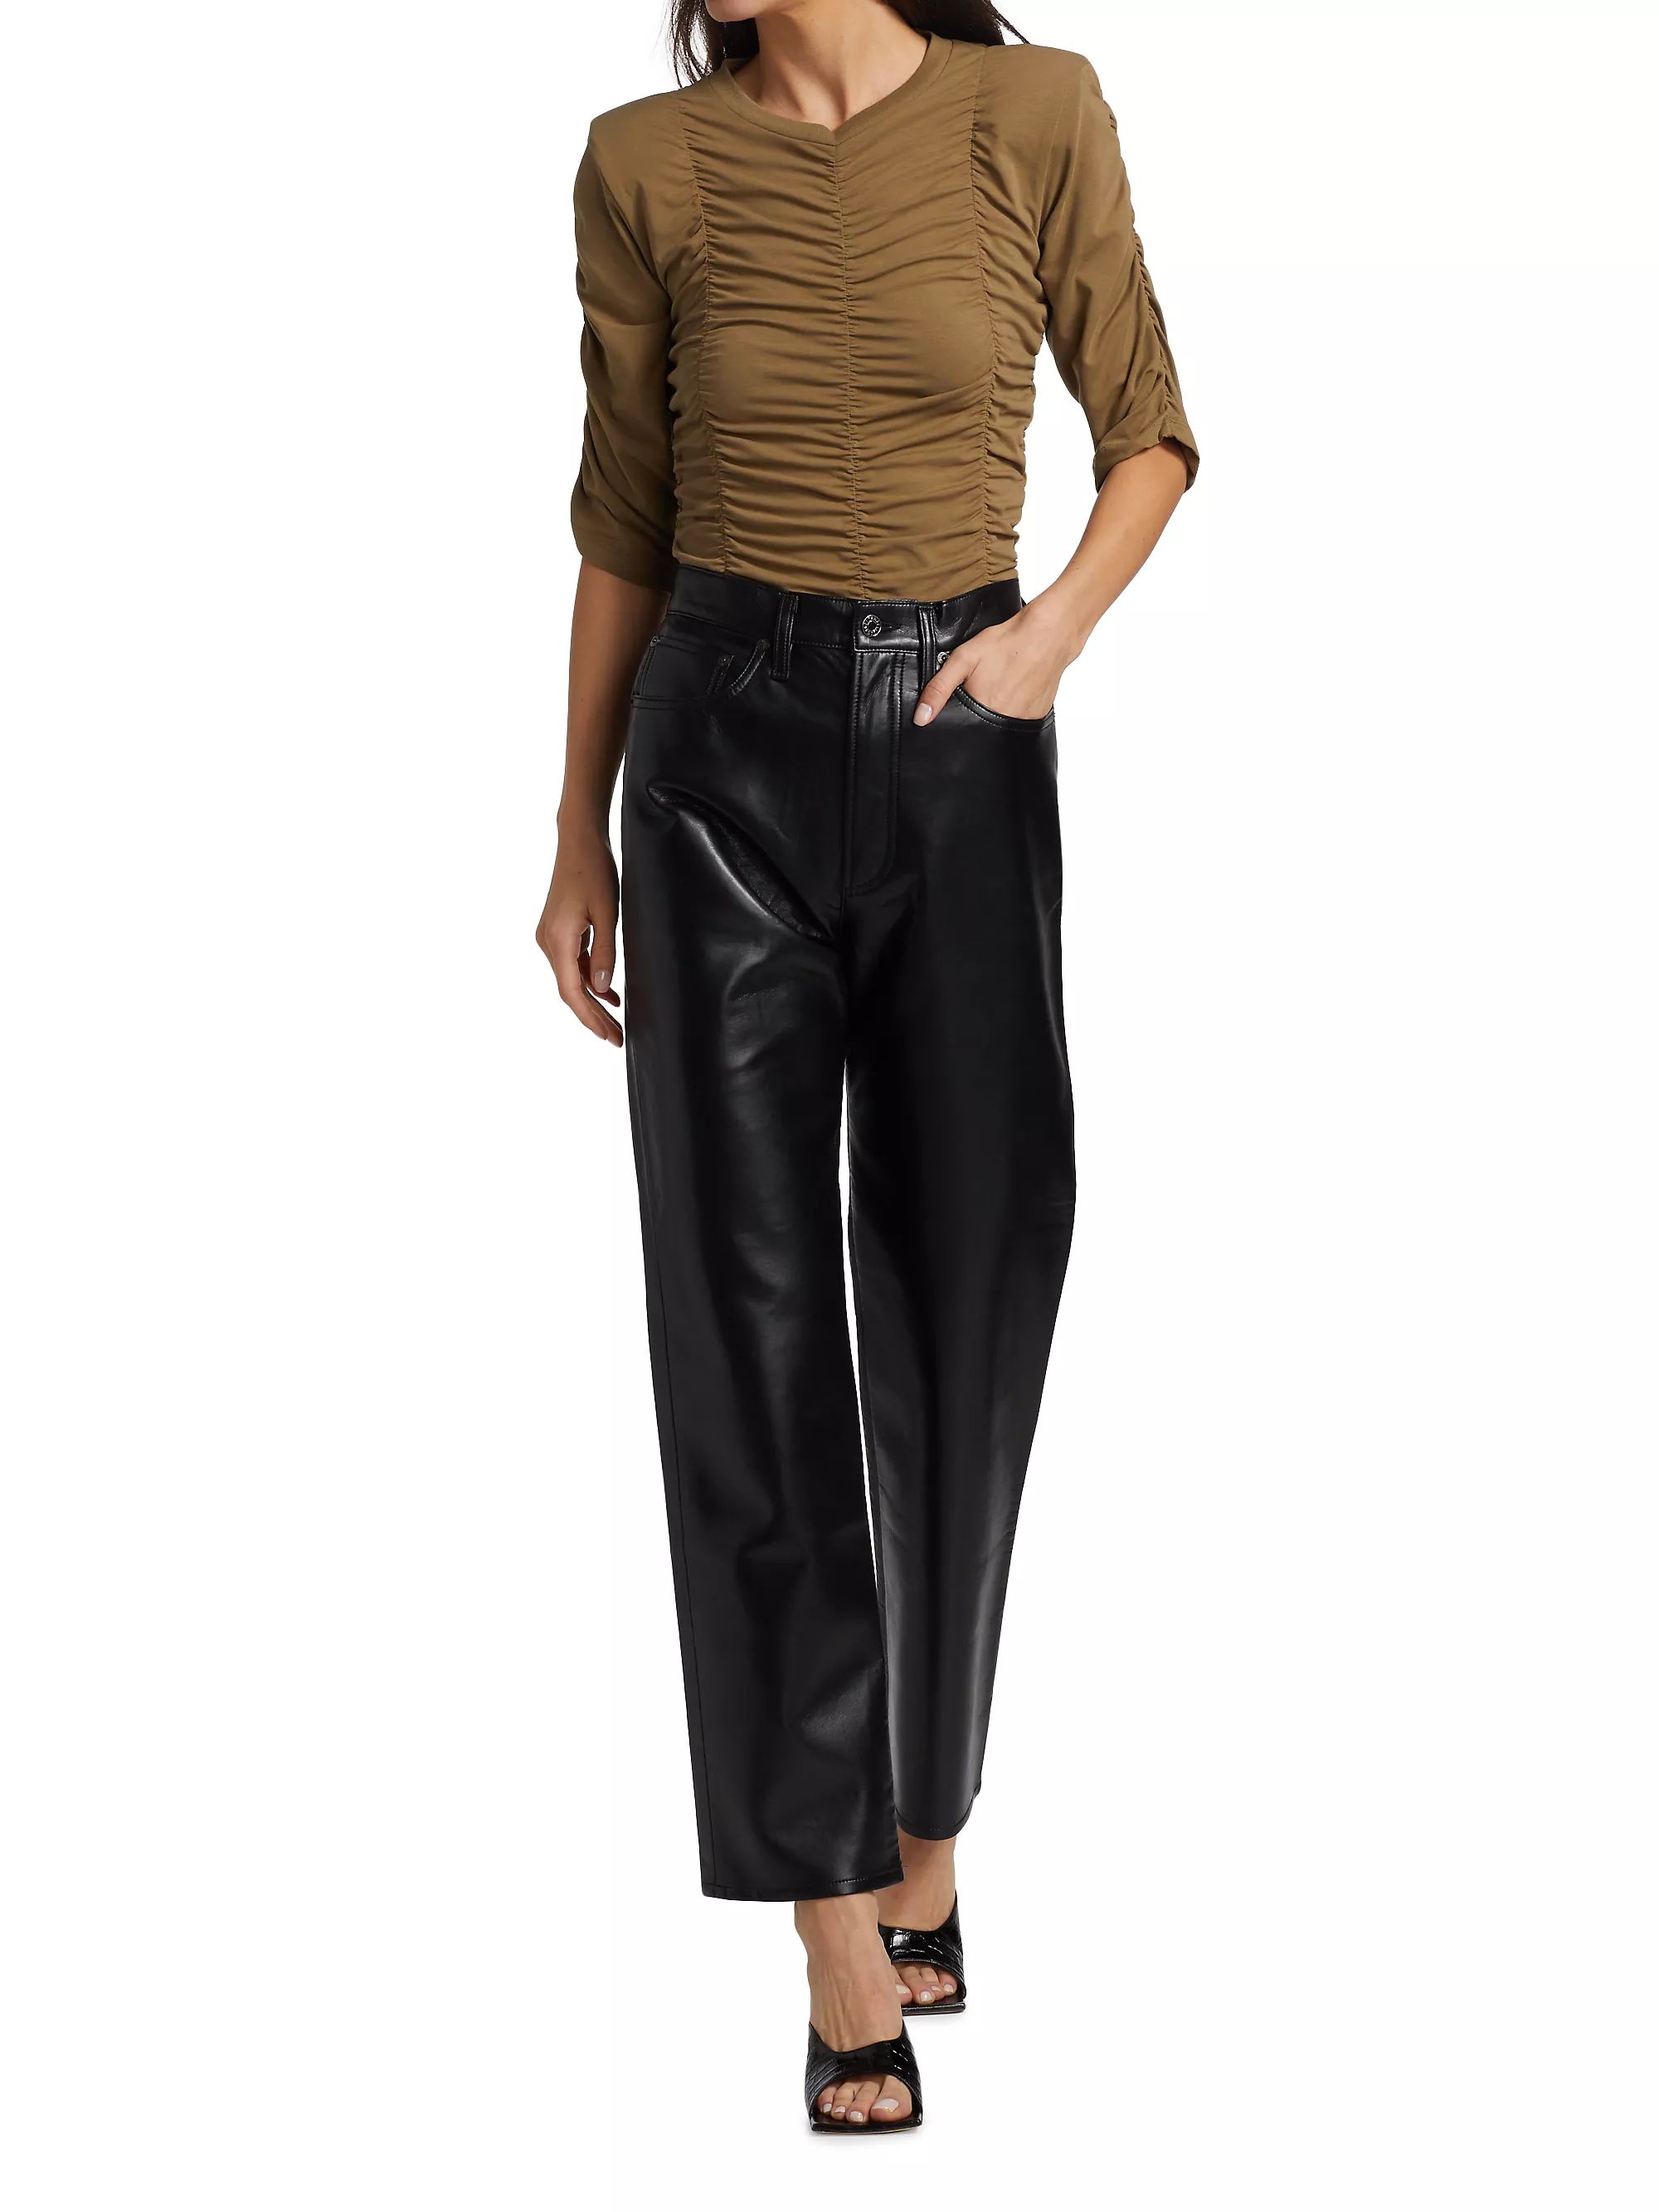 Recycled Leather Pants | Saks Fifth Avenue